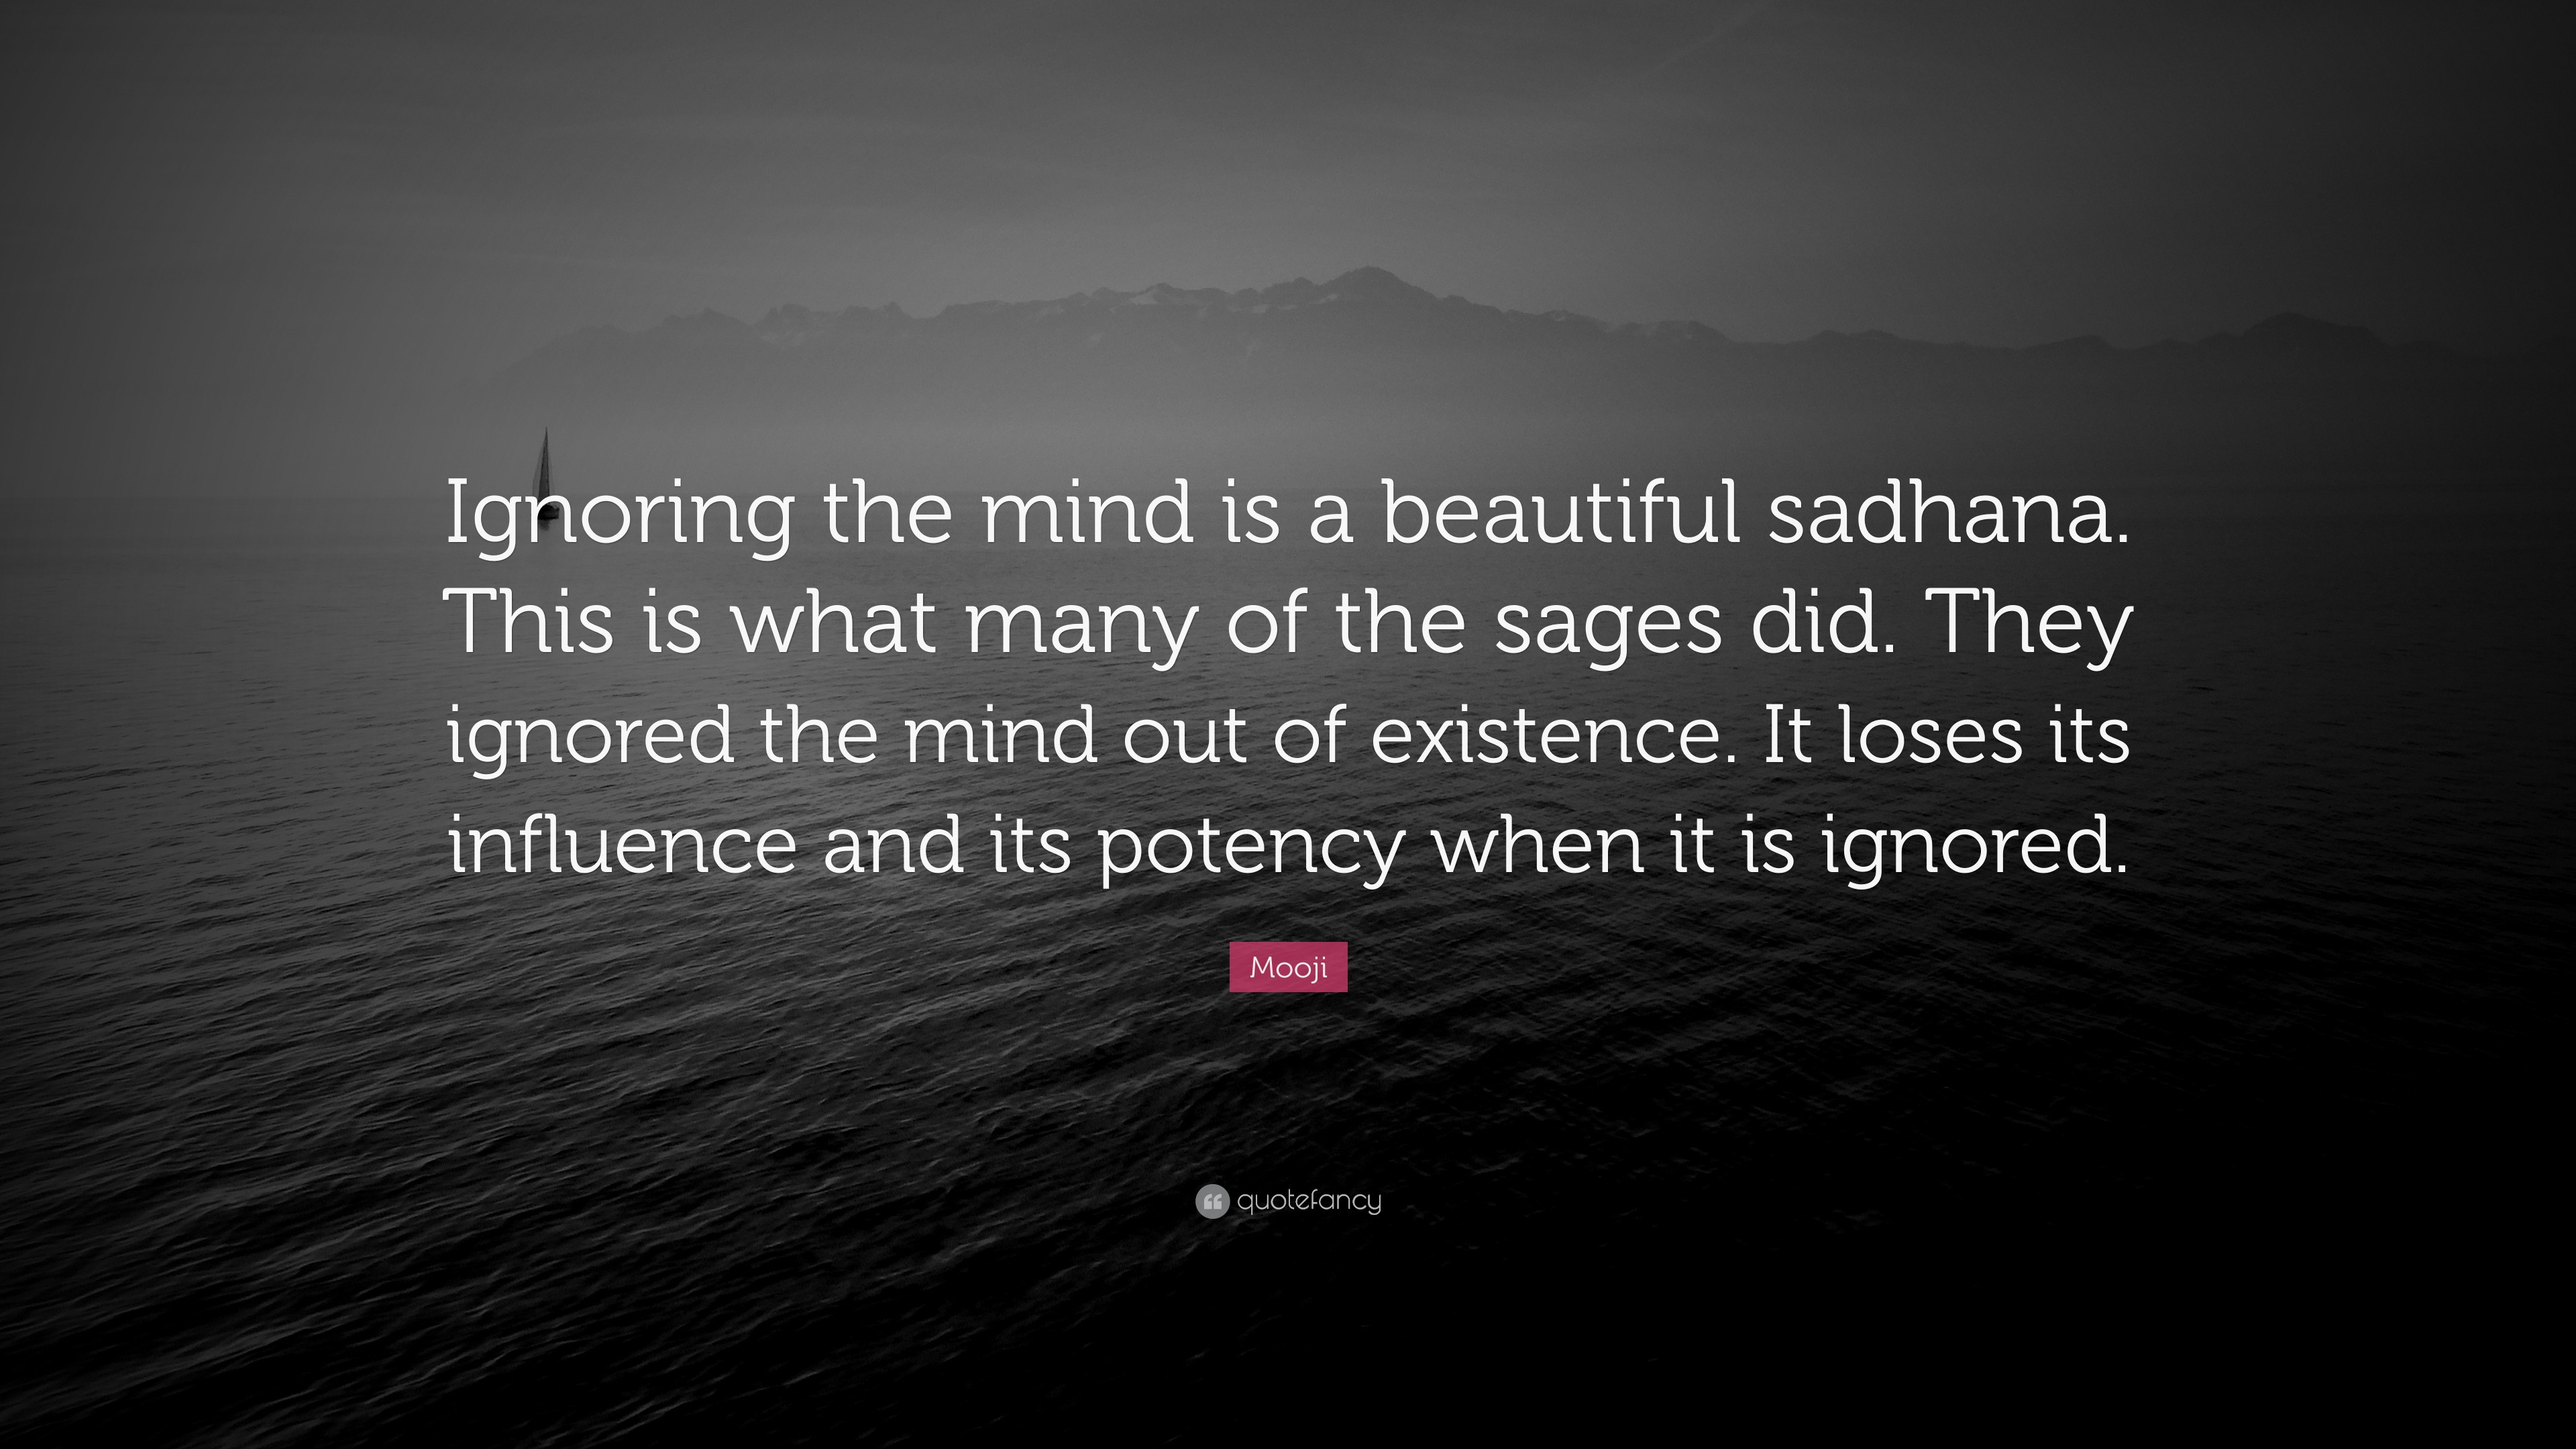 Mooji Quote “Ignoring the mind is a beautiful sadhana This is what many